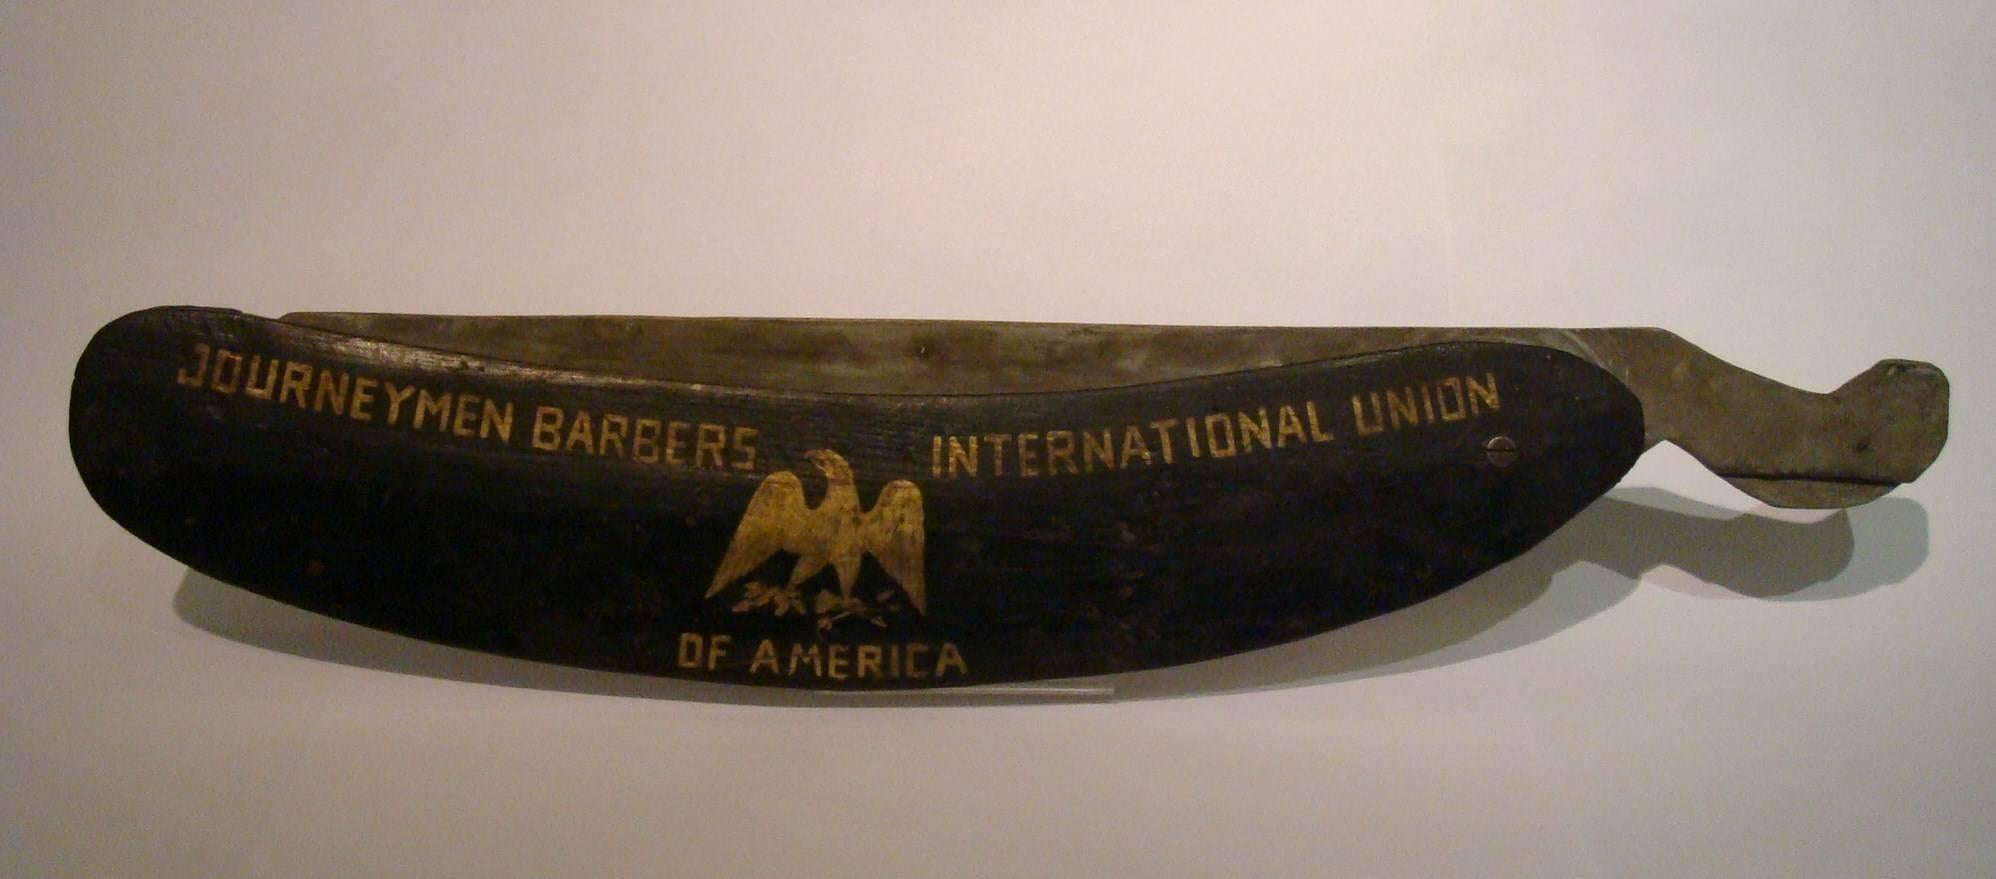 Antique razor trade sign, Folk Art, Americana. Razor shaving hair barber knife Folk Art.
Awesome antique razor/barber trade sign.

All handmade wood construction
hand-painted black sheath and silver blade, has some wear as you can see on the